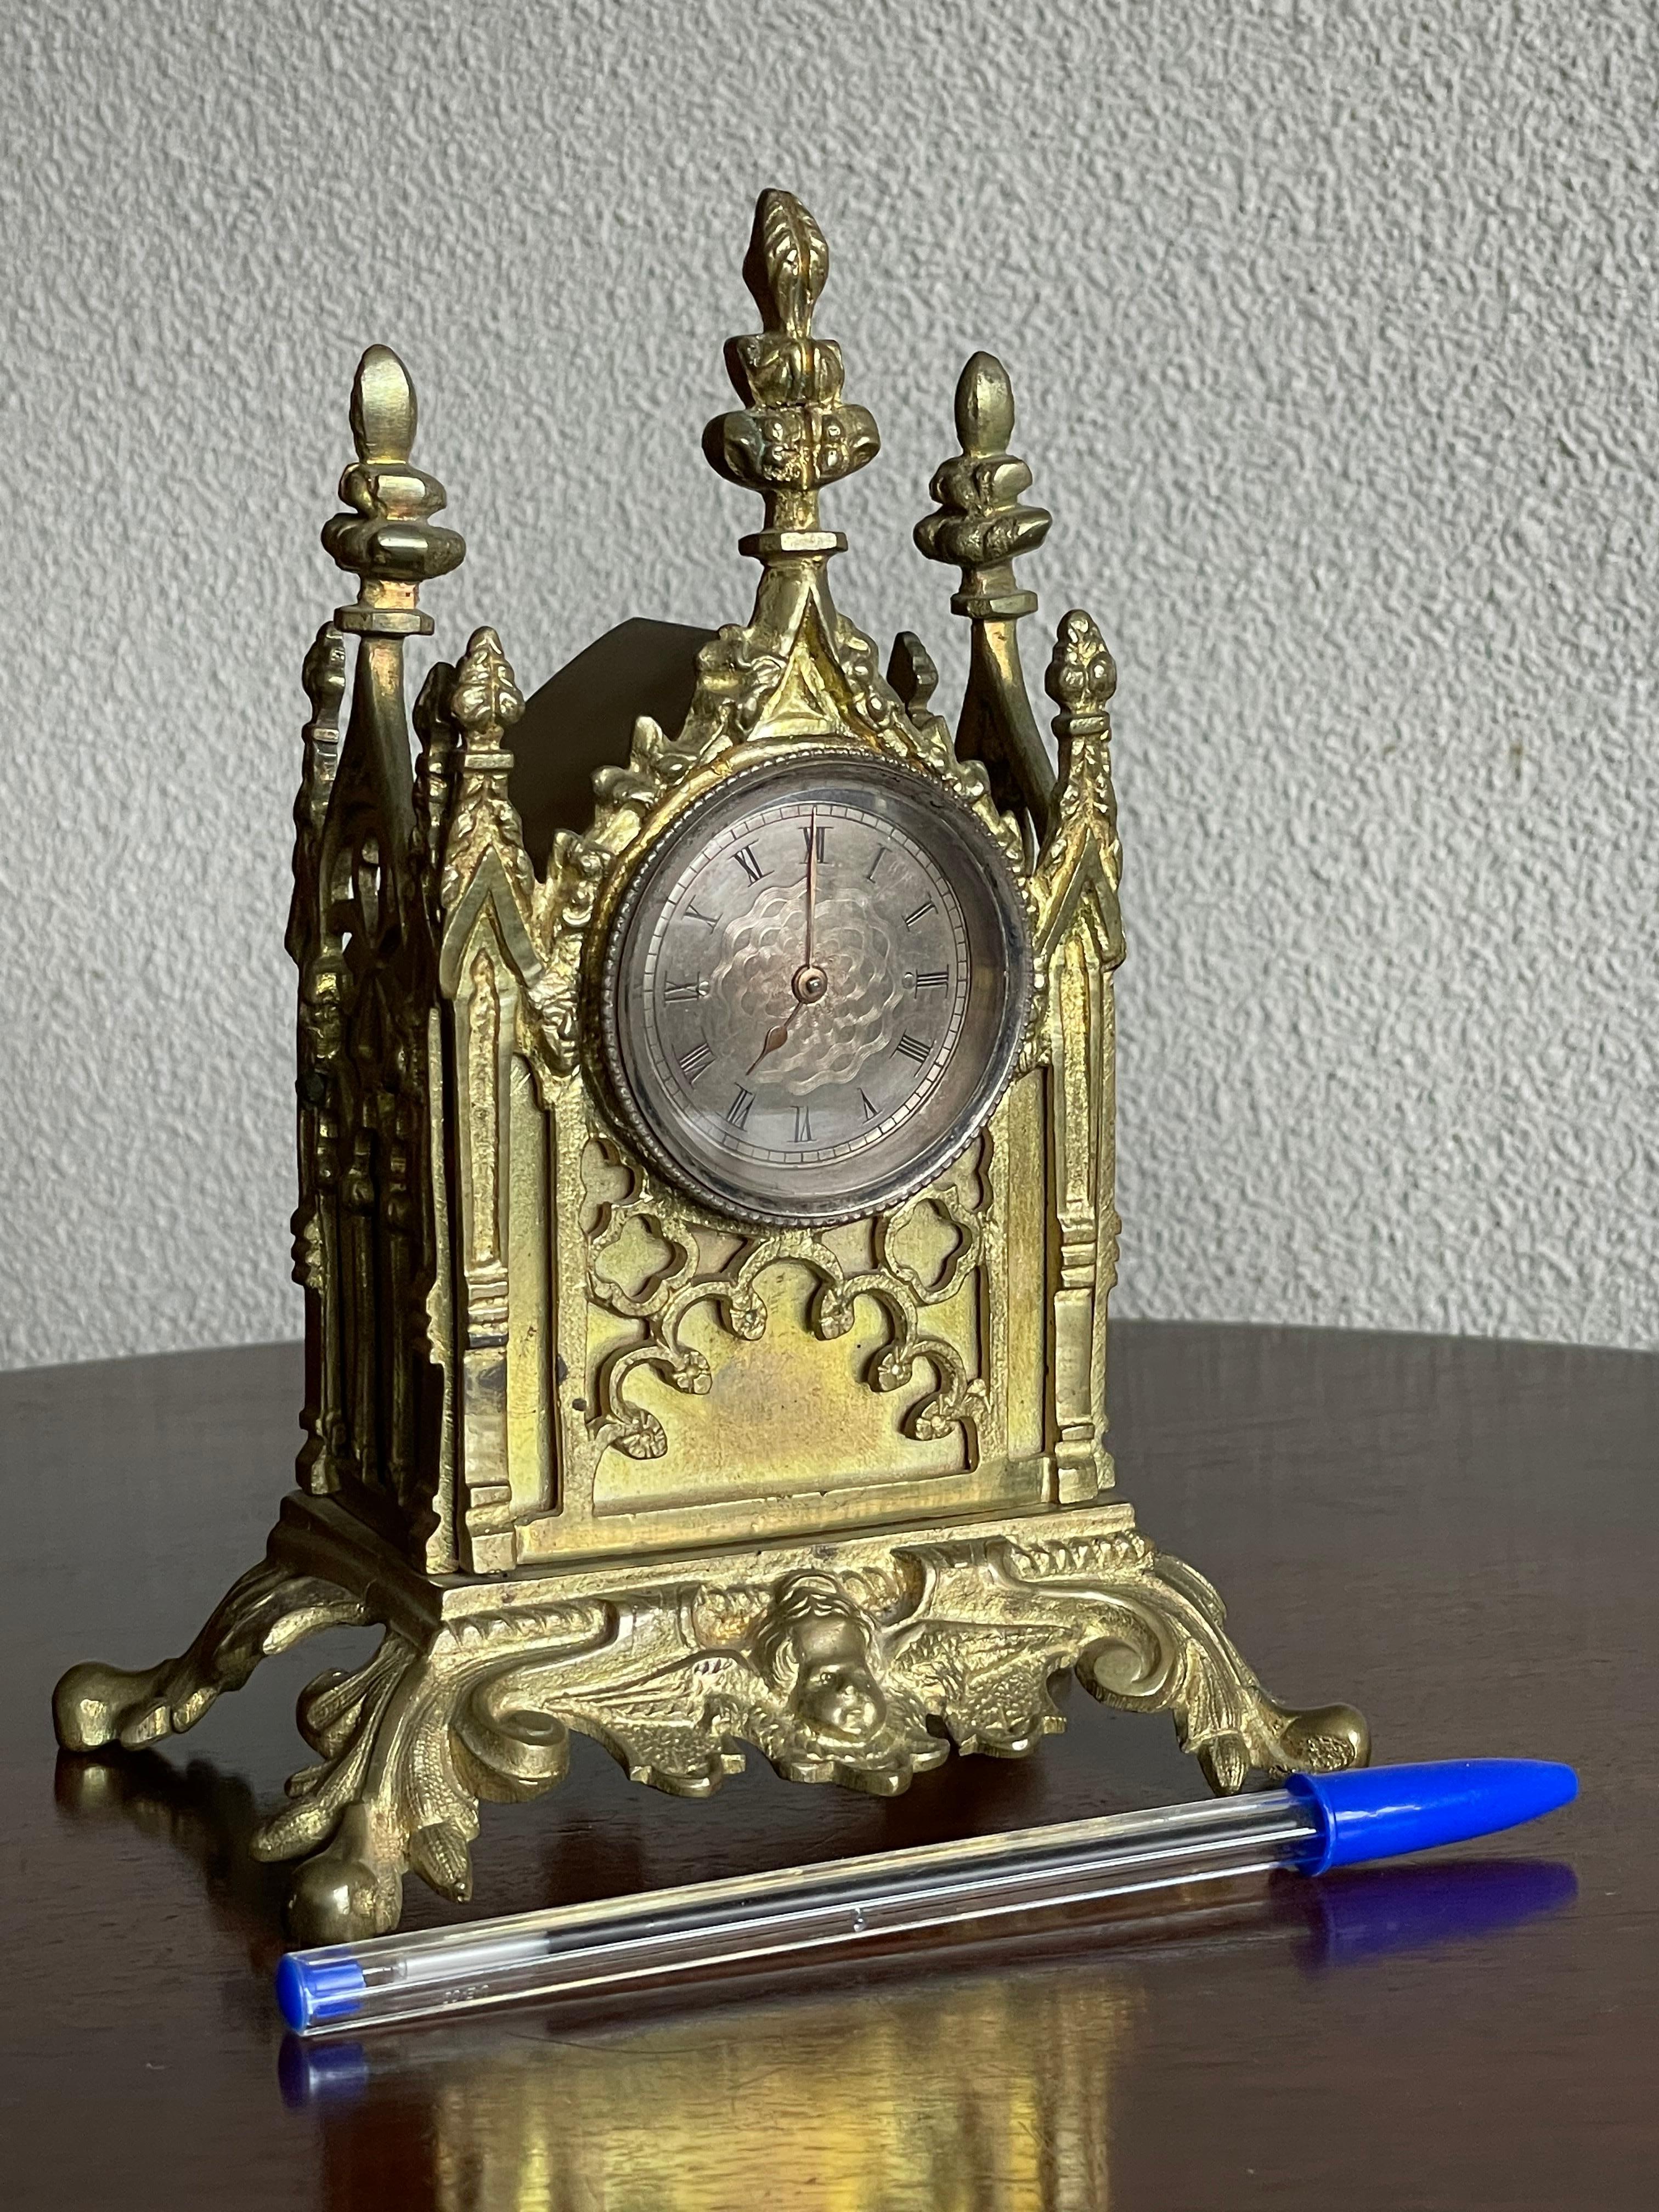 Glass Gothic Table Clock w. Stunning Antique Pocket Watch Made of Gilt Bronze or Gold For Sale